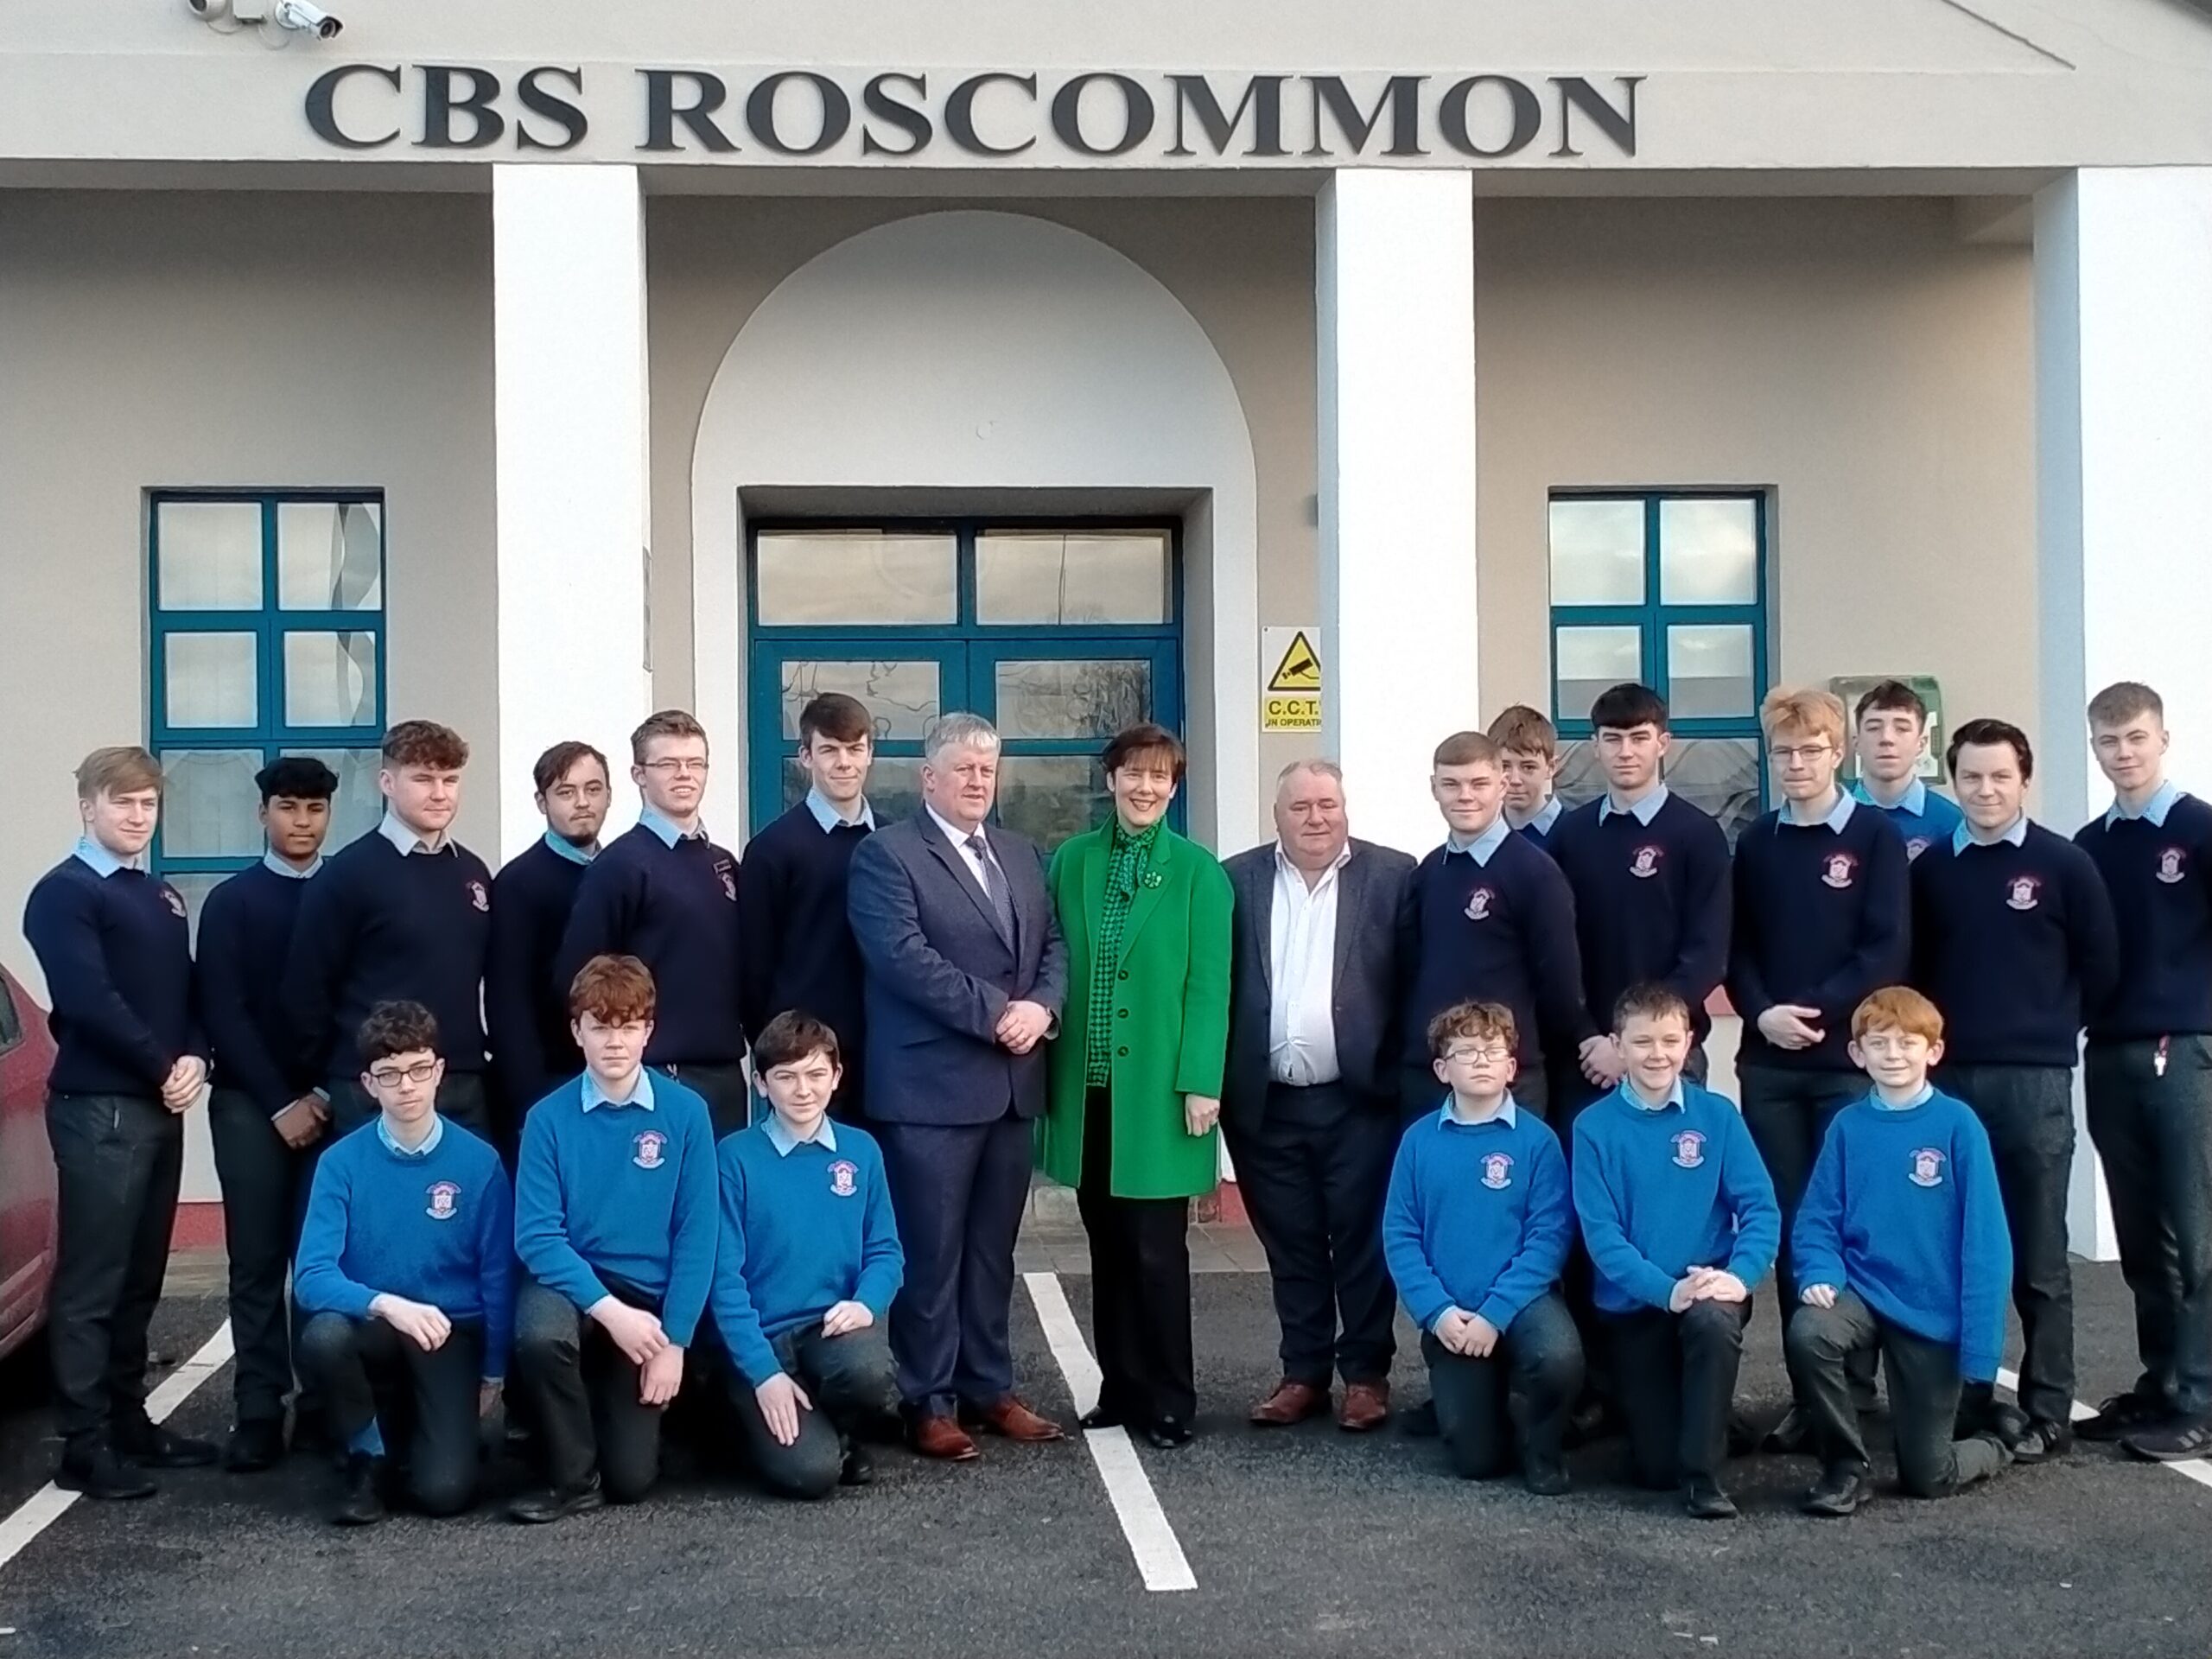 Minister for Education Norma Foley visits CBS Roscommon